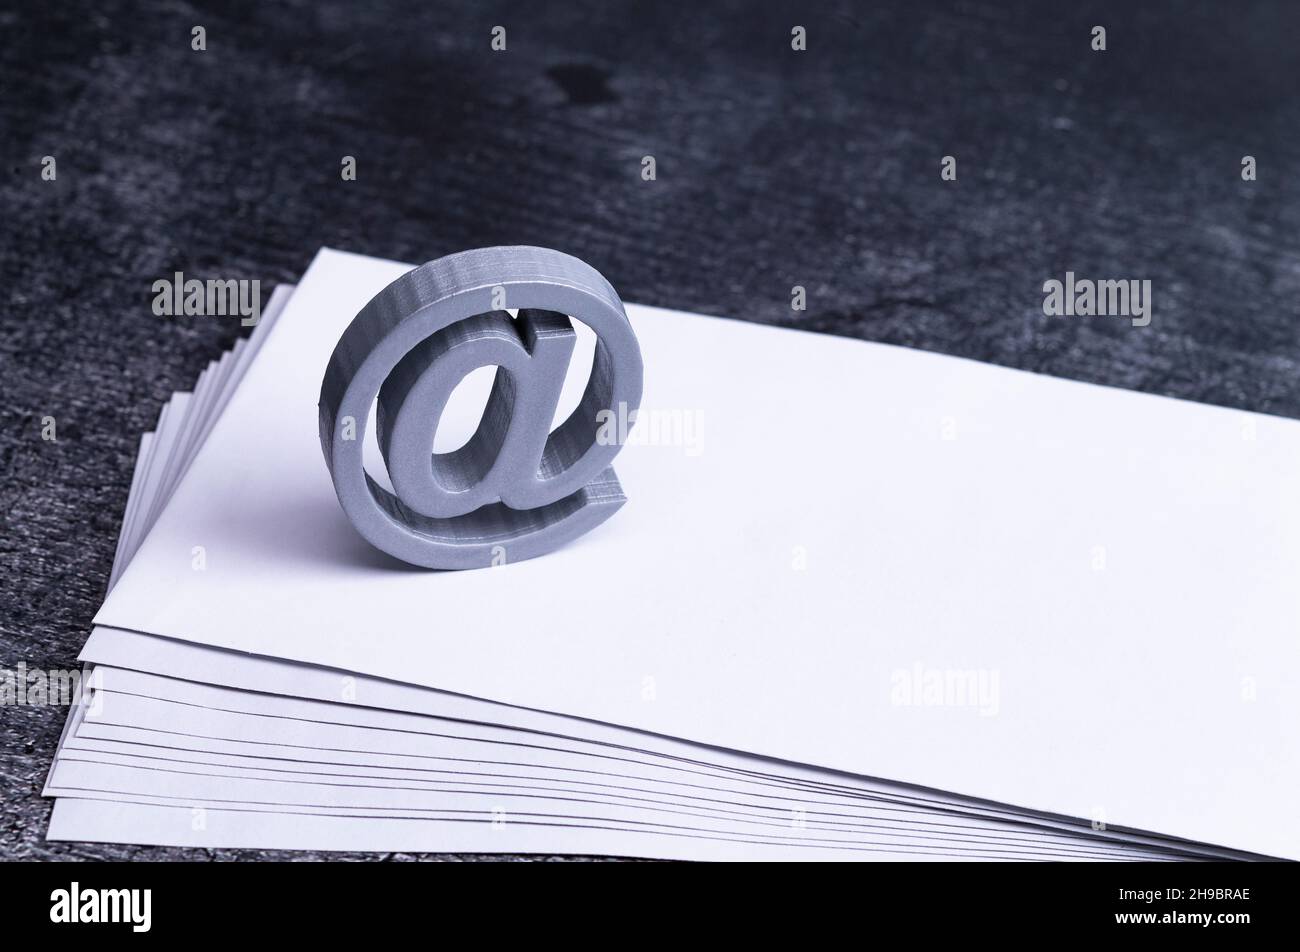 The photo shows an AT sign on a stack of envelopes Stock Photo